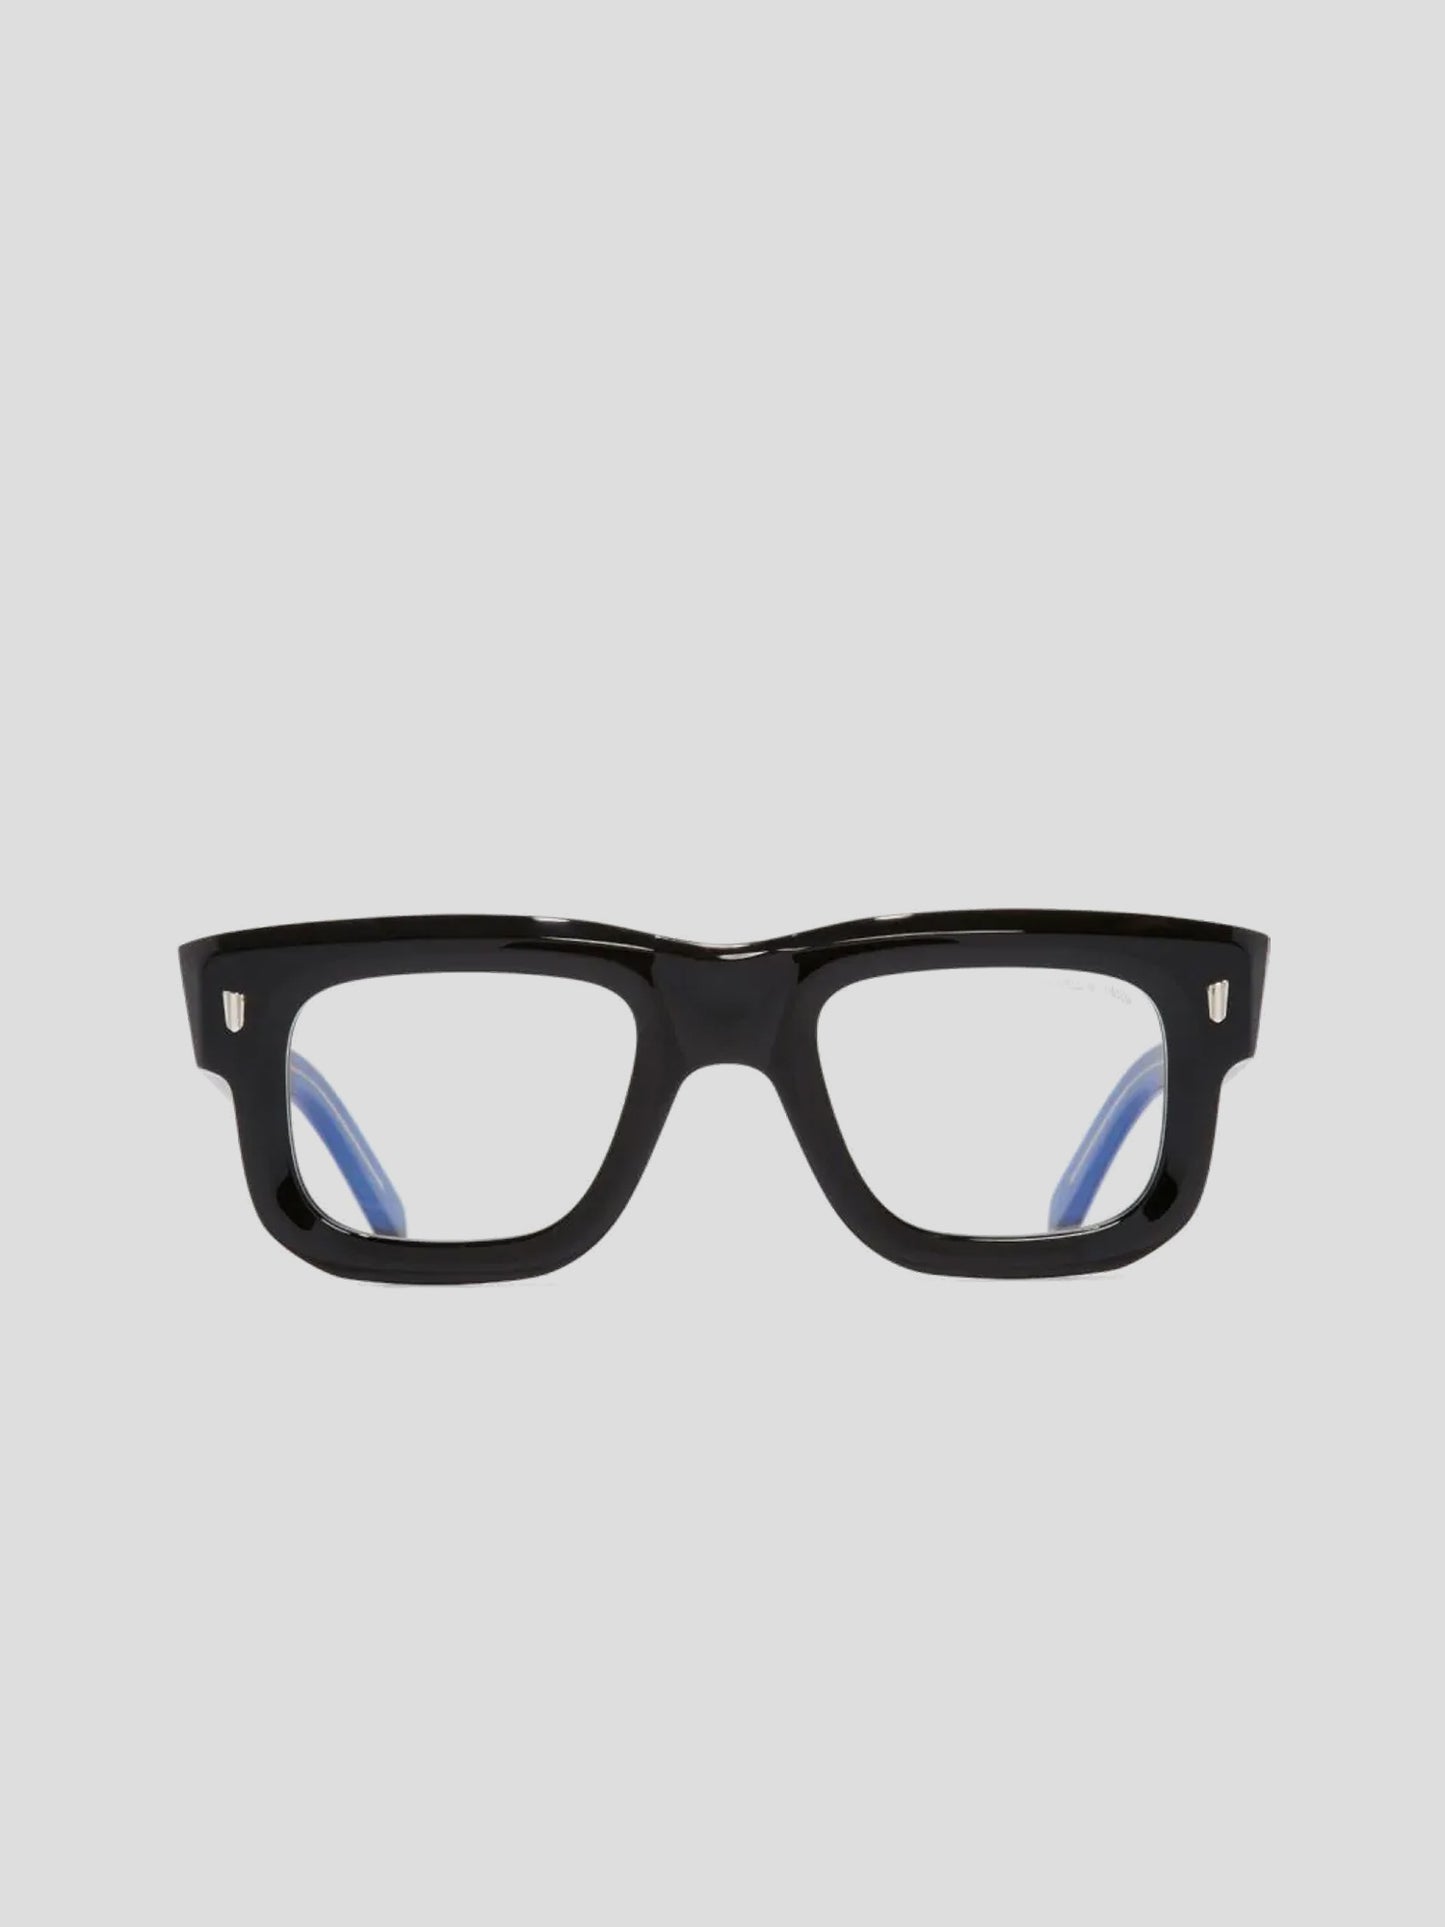 Square Optical Glasses, Black on Yellow